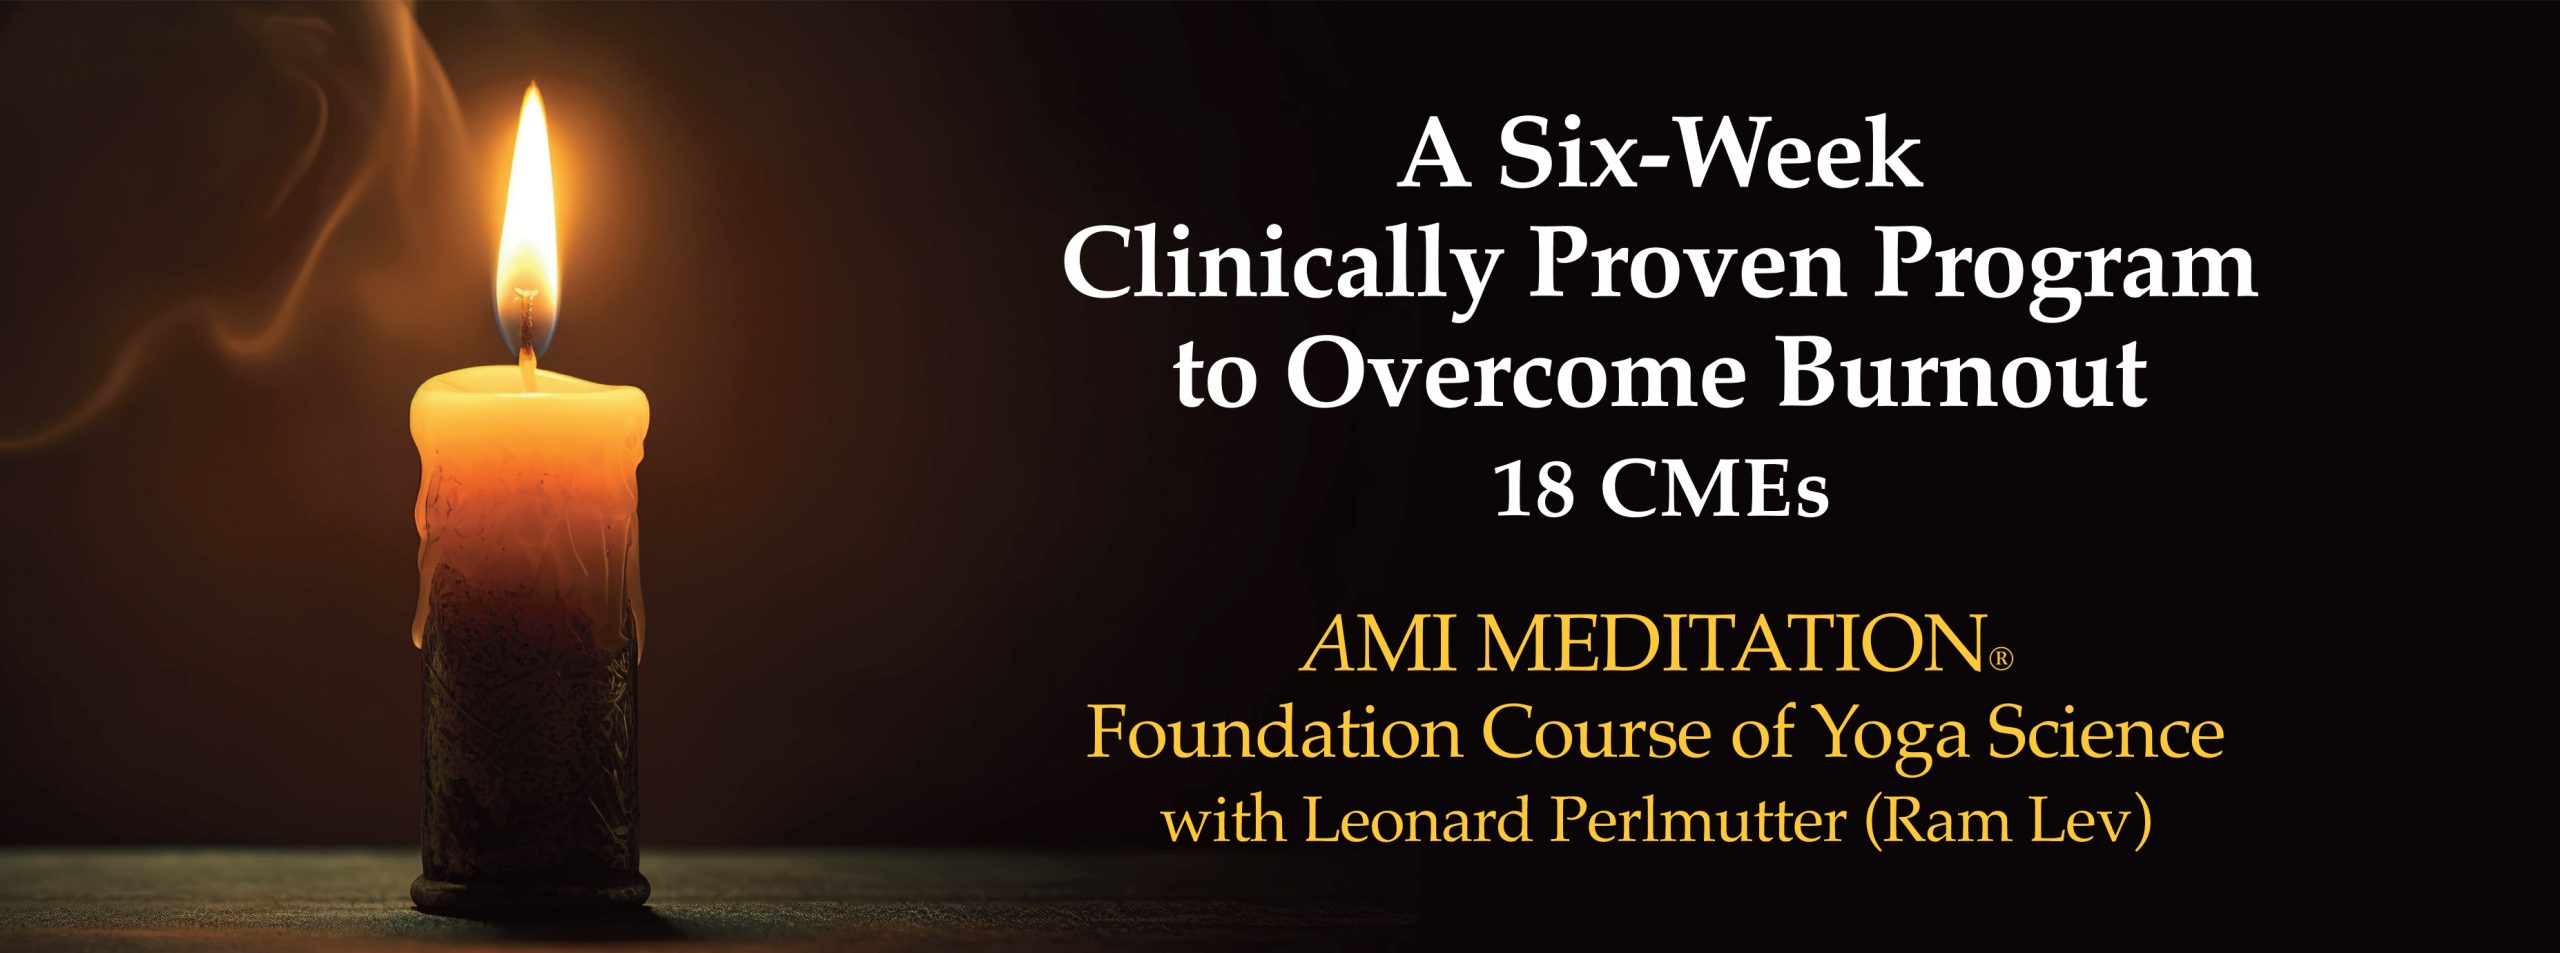 AMI Meditation - A Six-Week Clinically Proven Program to Overcome Burnout